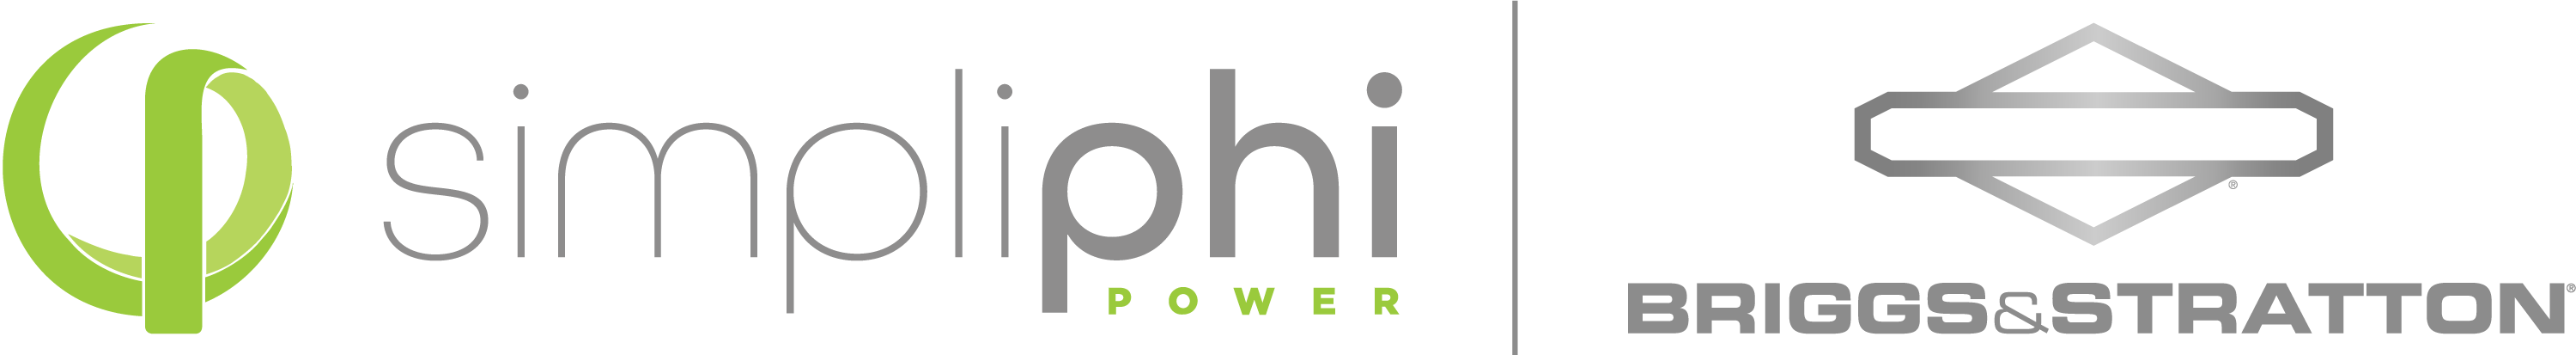 SimpliPhi Launches “Energize America: Prepare & Respond” Campaign, Bringing Affordable Energy Storage Solutions to Homeowners and Businesses